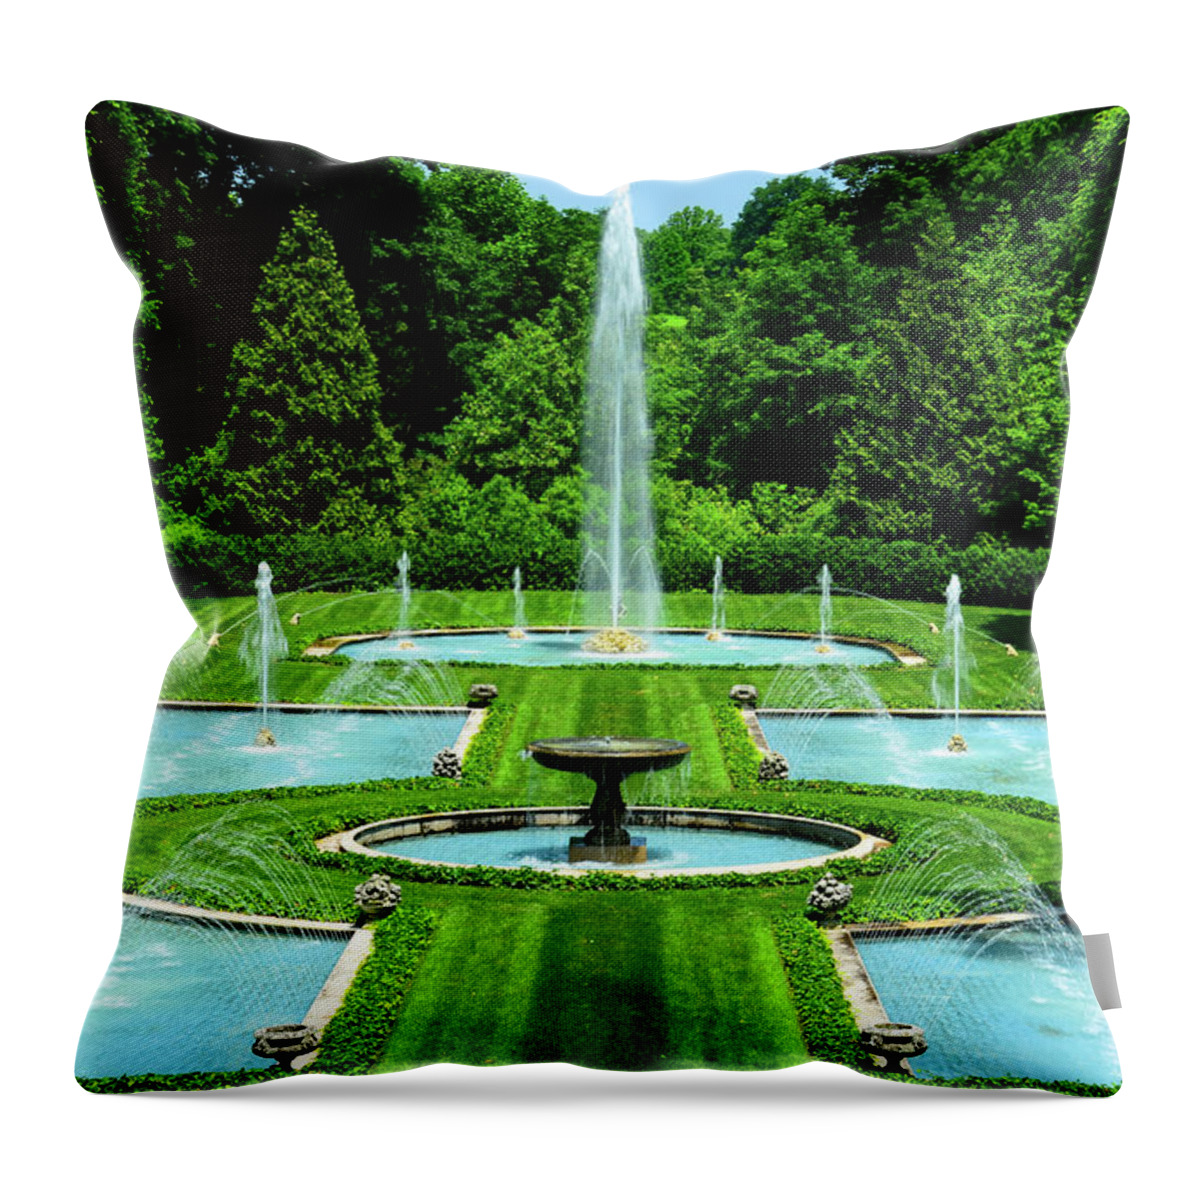 Fountains Throw Pillow featuring the photograph Fountains by Crystal Wightman